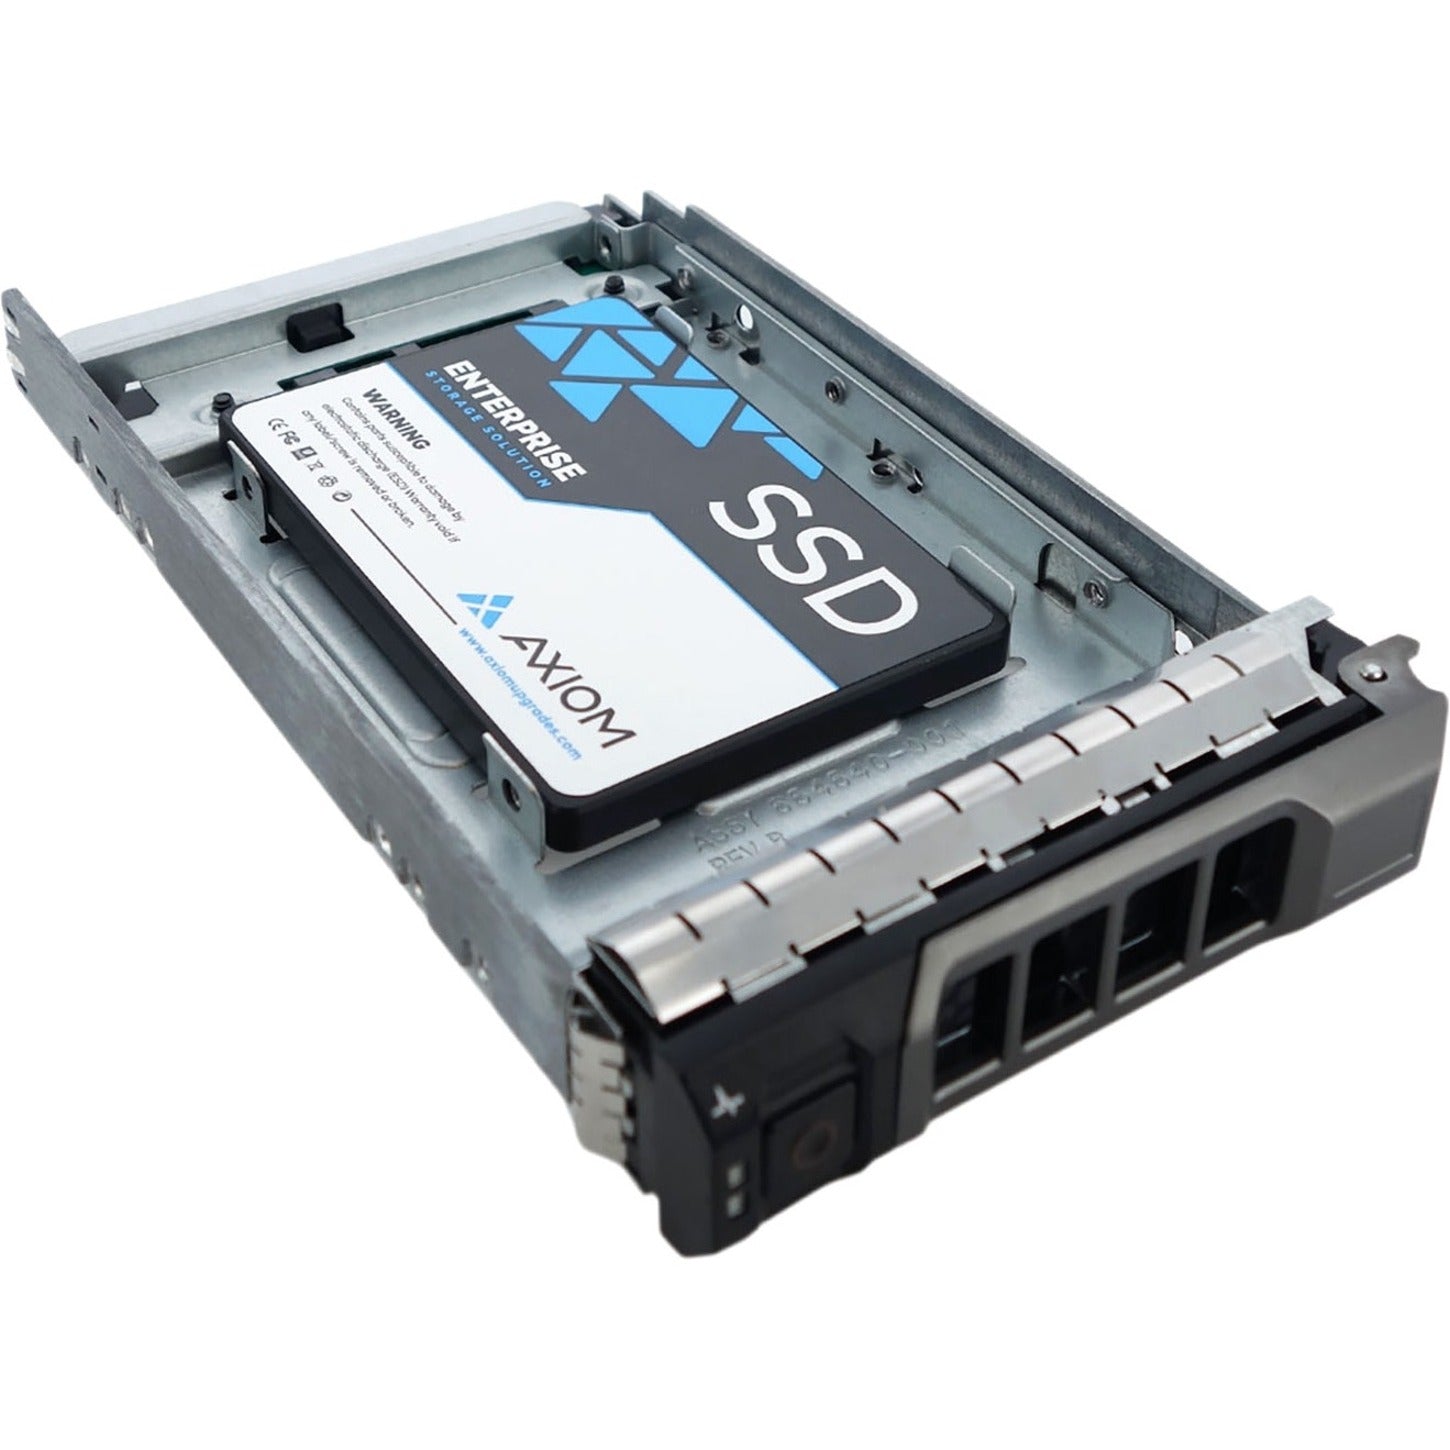 Axiom SSDEV20DF960-AX 960GB Enterprise EV200 SSD for Dell, High Performance and Eco-Friendly Solid State Drive